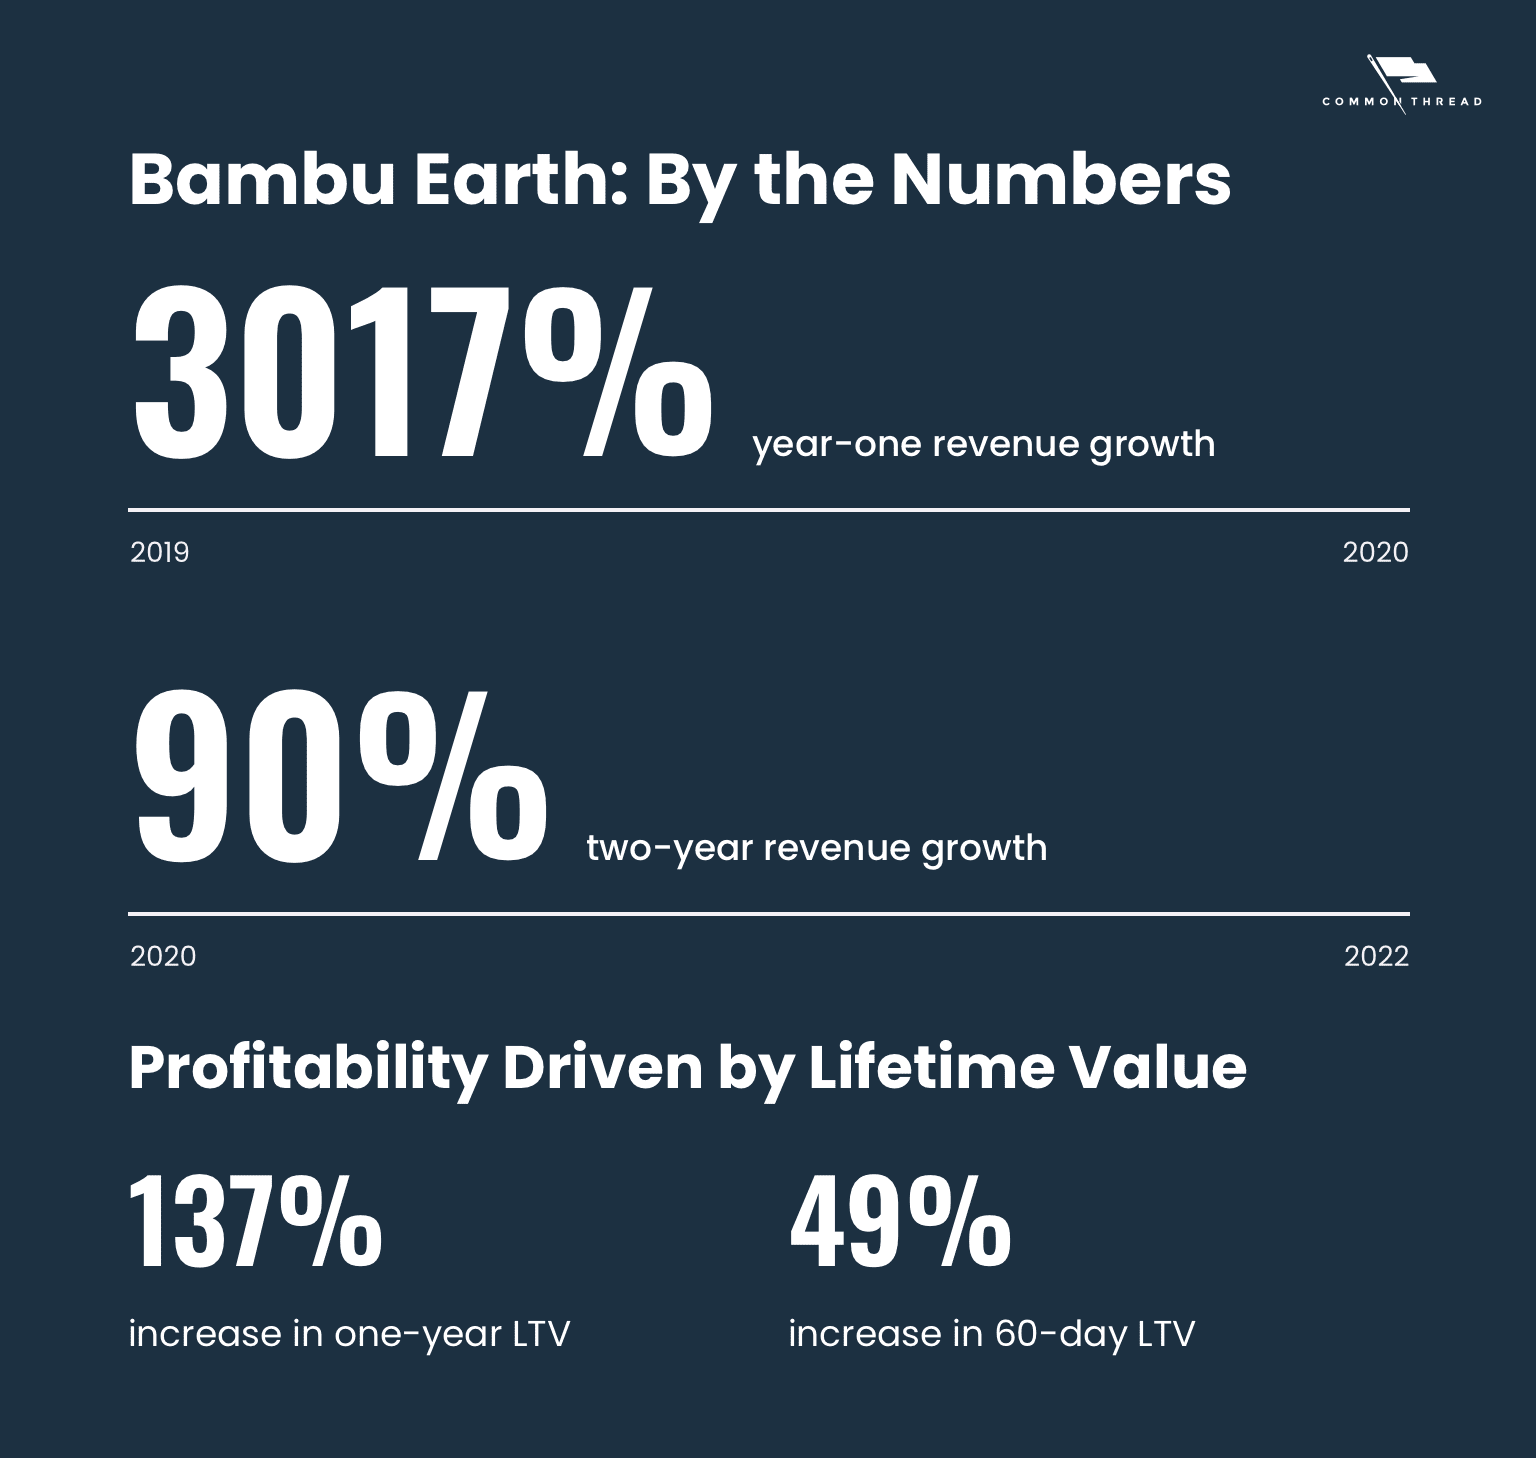 Bambu Earth by the numbers